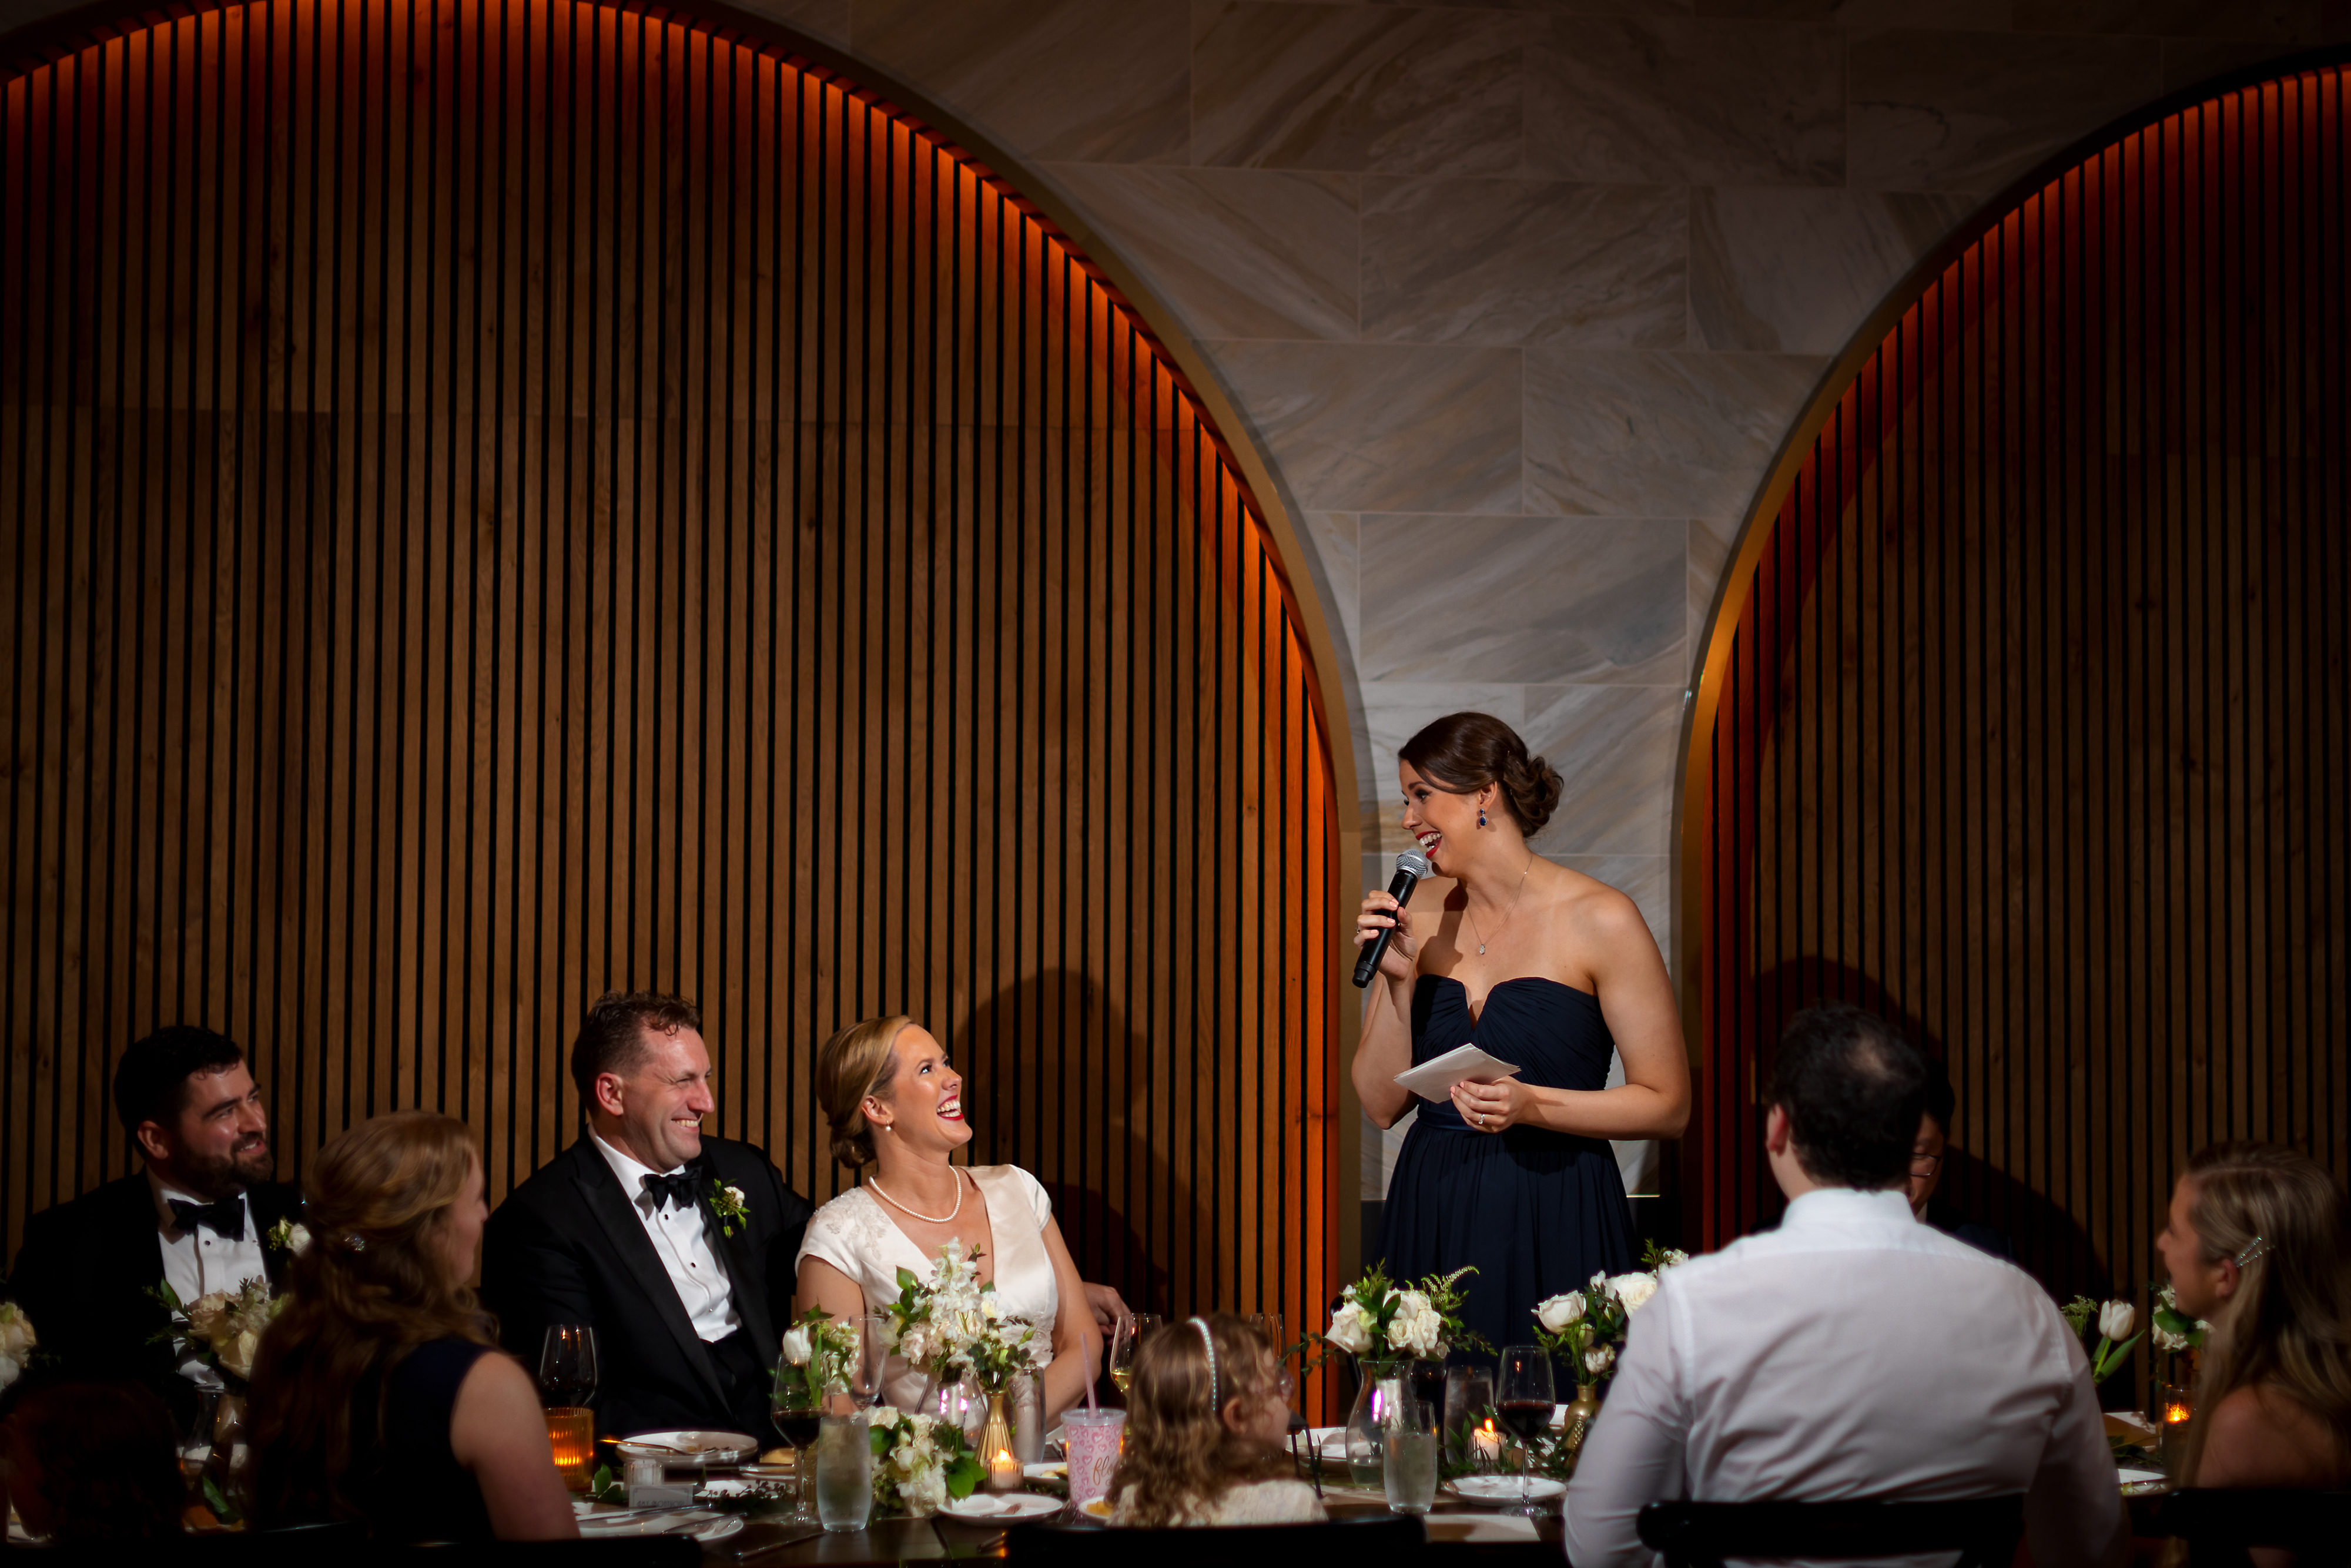 Maid of honor toast during wedding reception at Chicago Winery